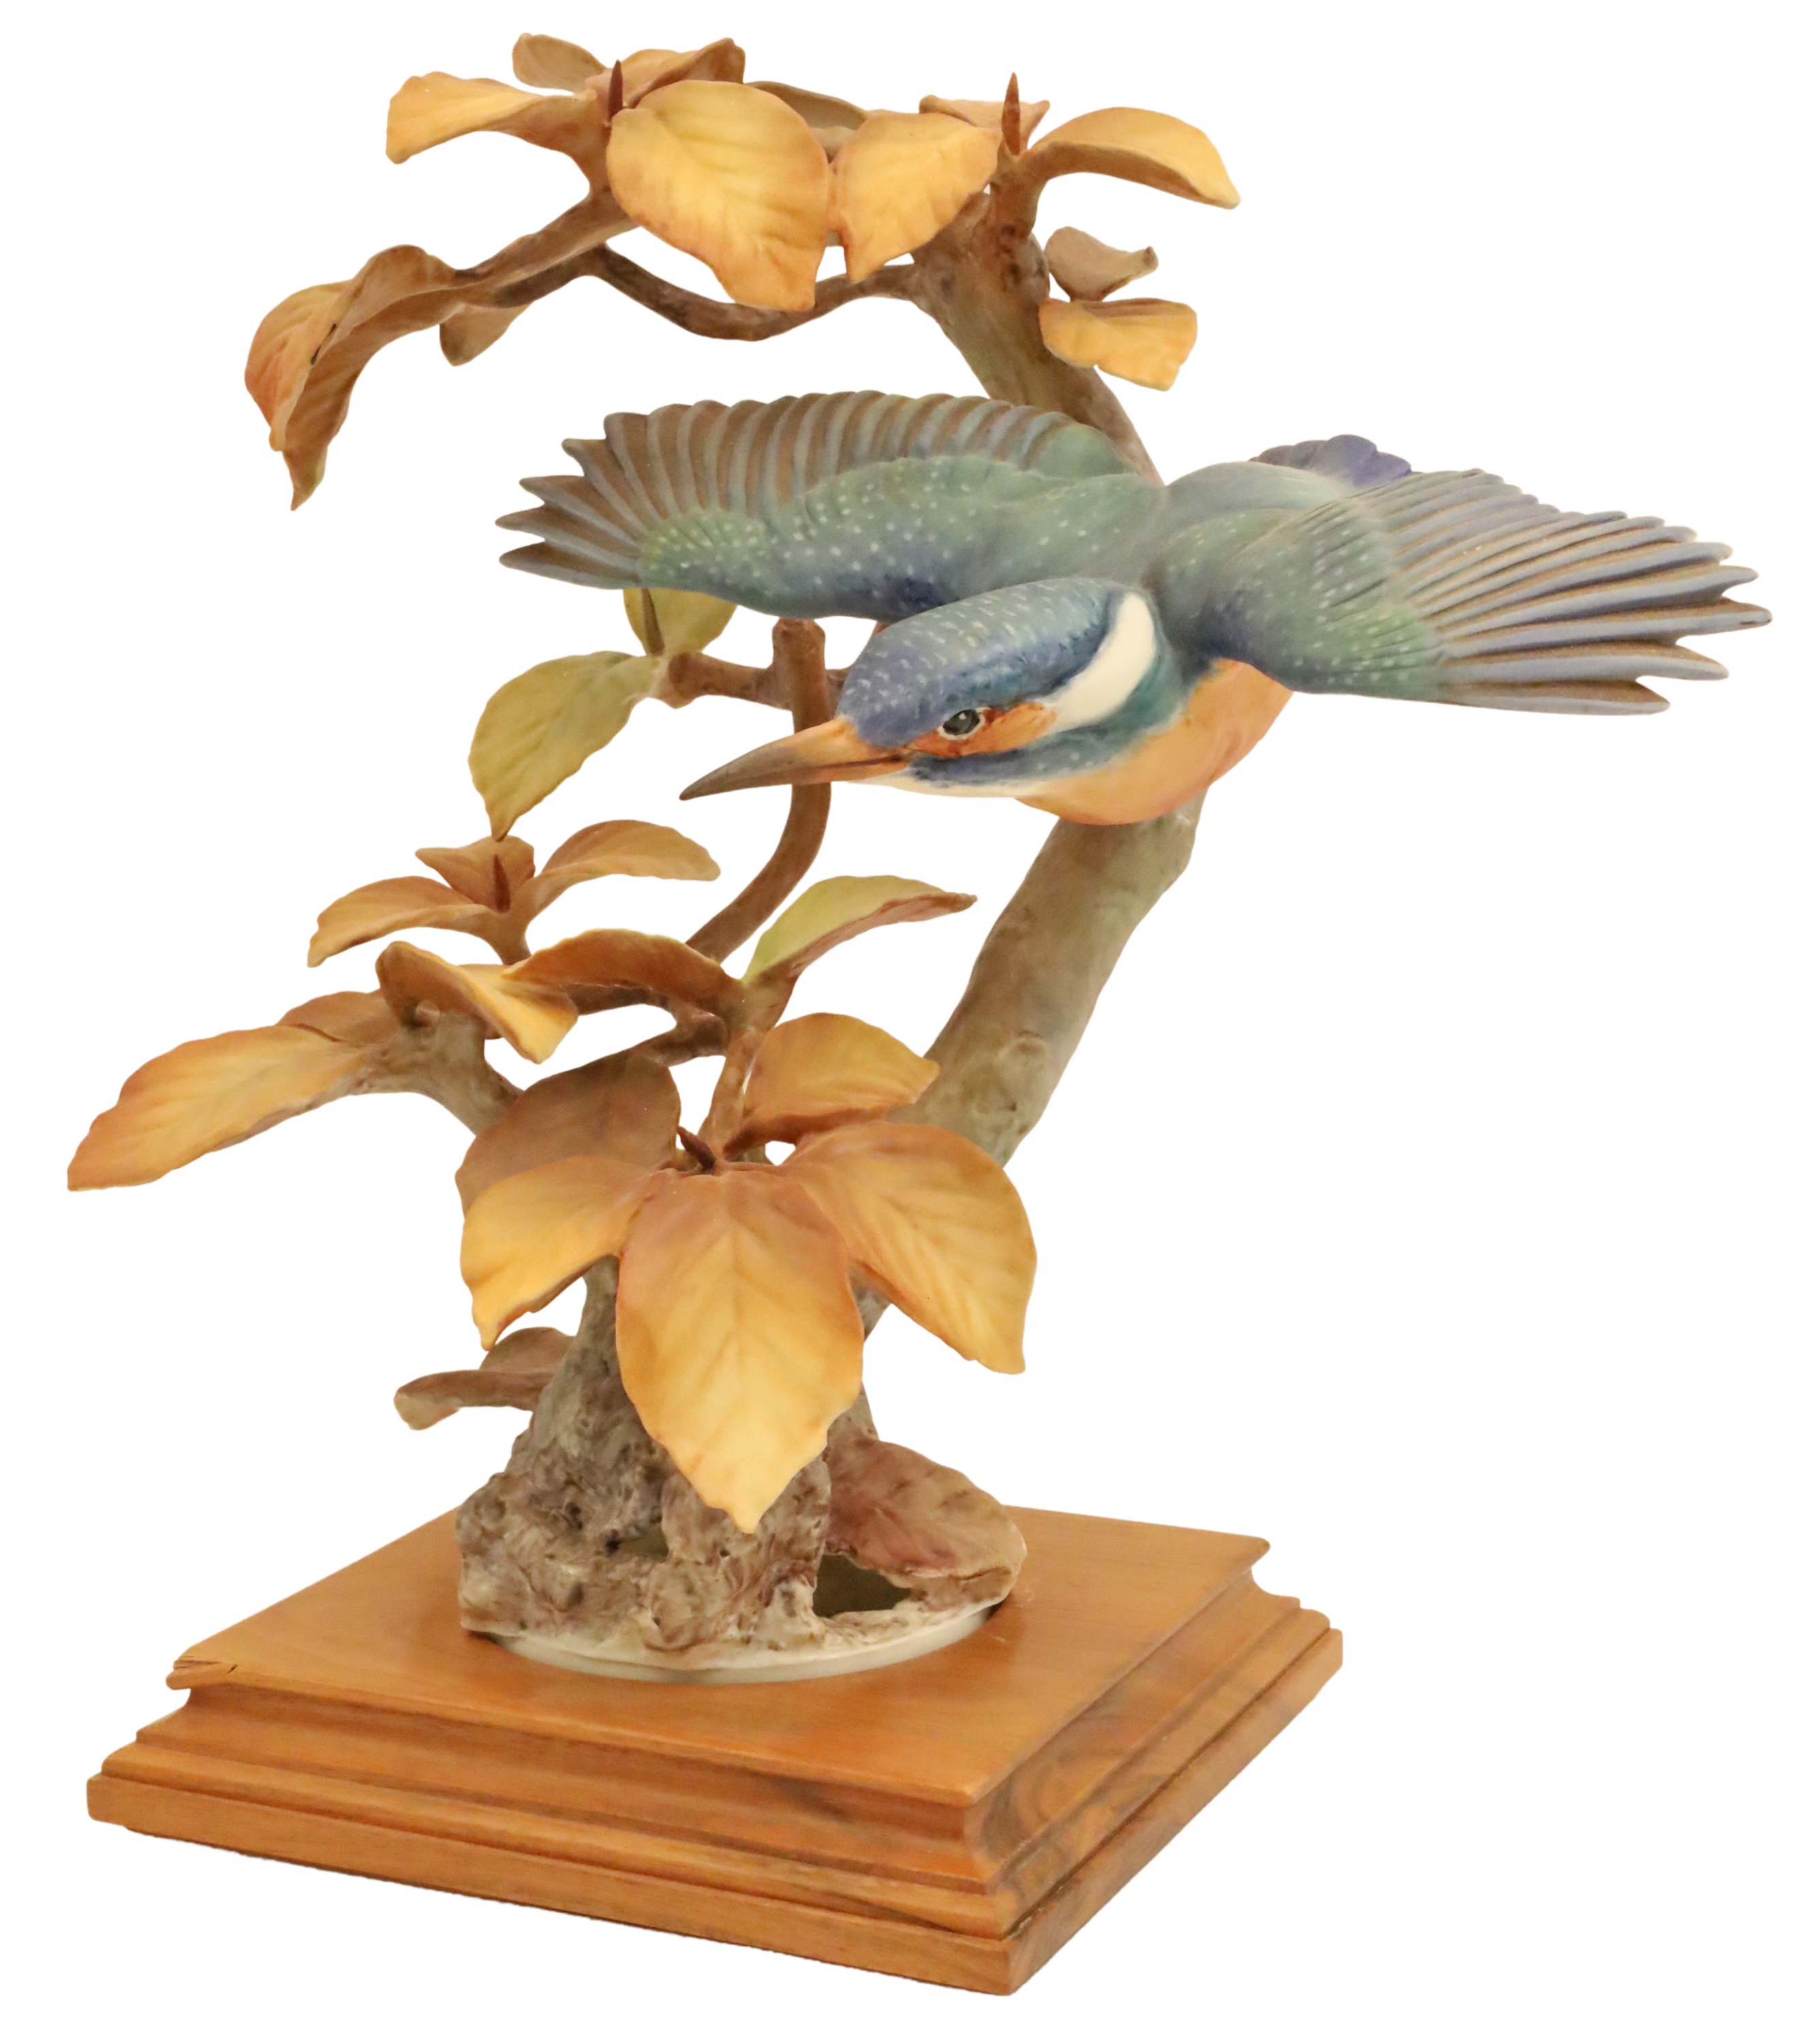 KINGFISHER BY DOROTHY DOUGHTY Porcelain 2f8ed1